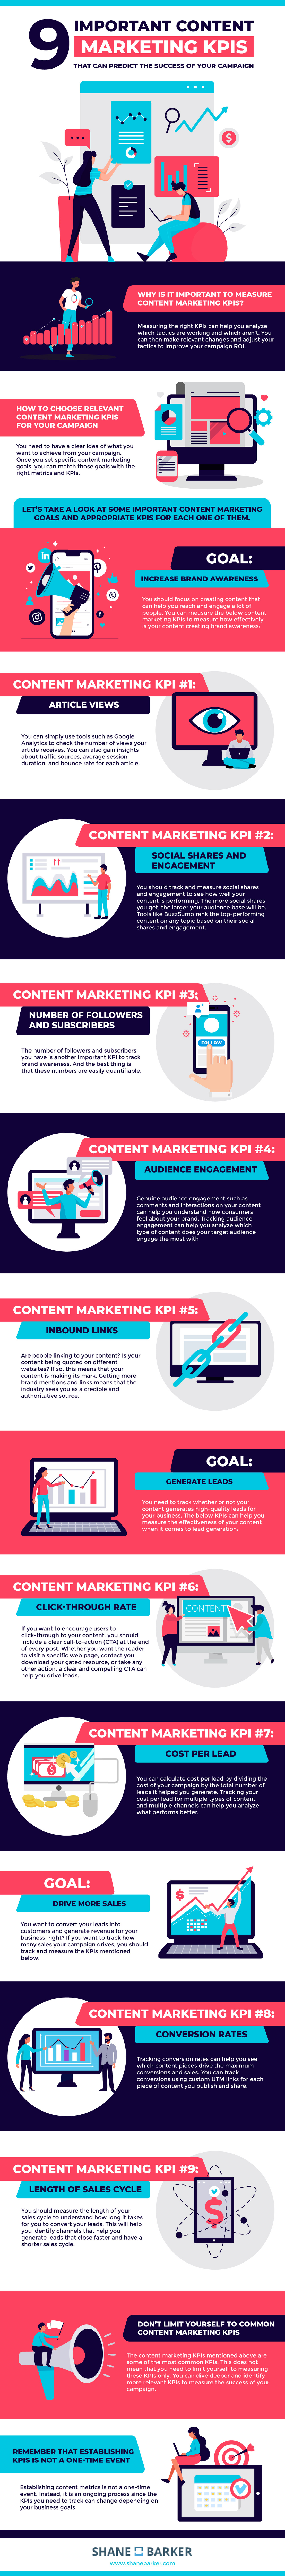 9 important content marketing kpis that can predict the success of your campaigninfographic